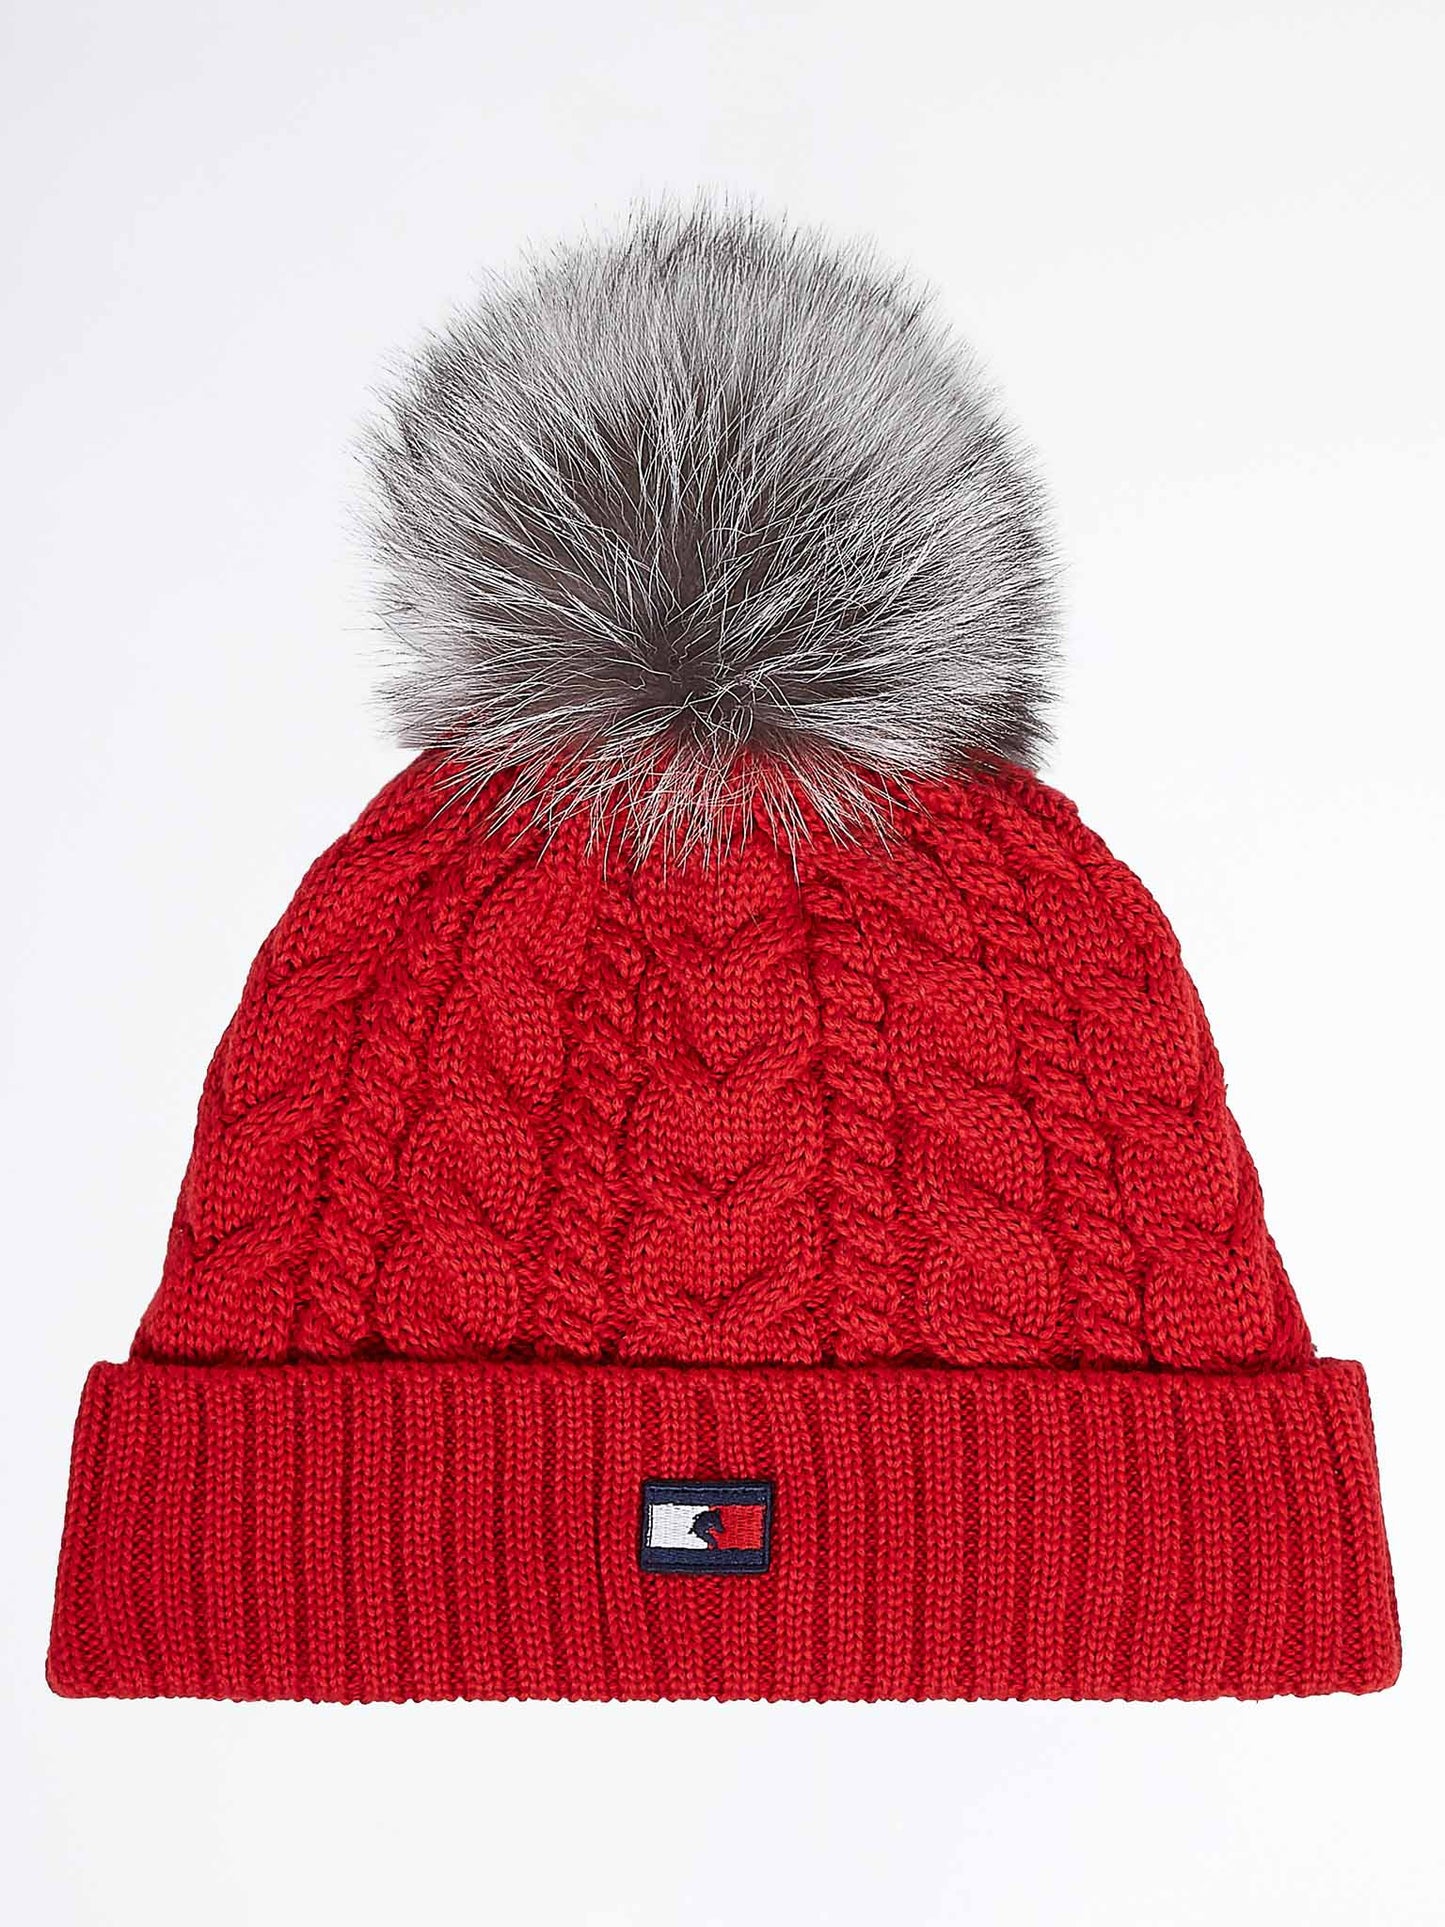 Bonnet Primary Red - Tommy Hilfiger Equestrian